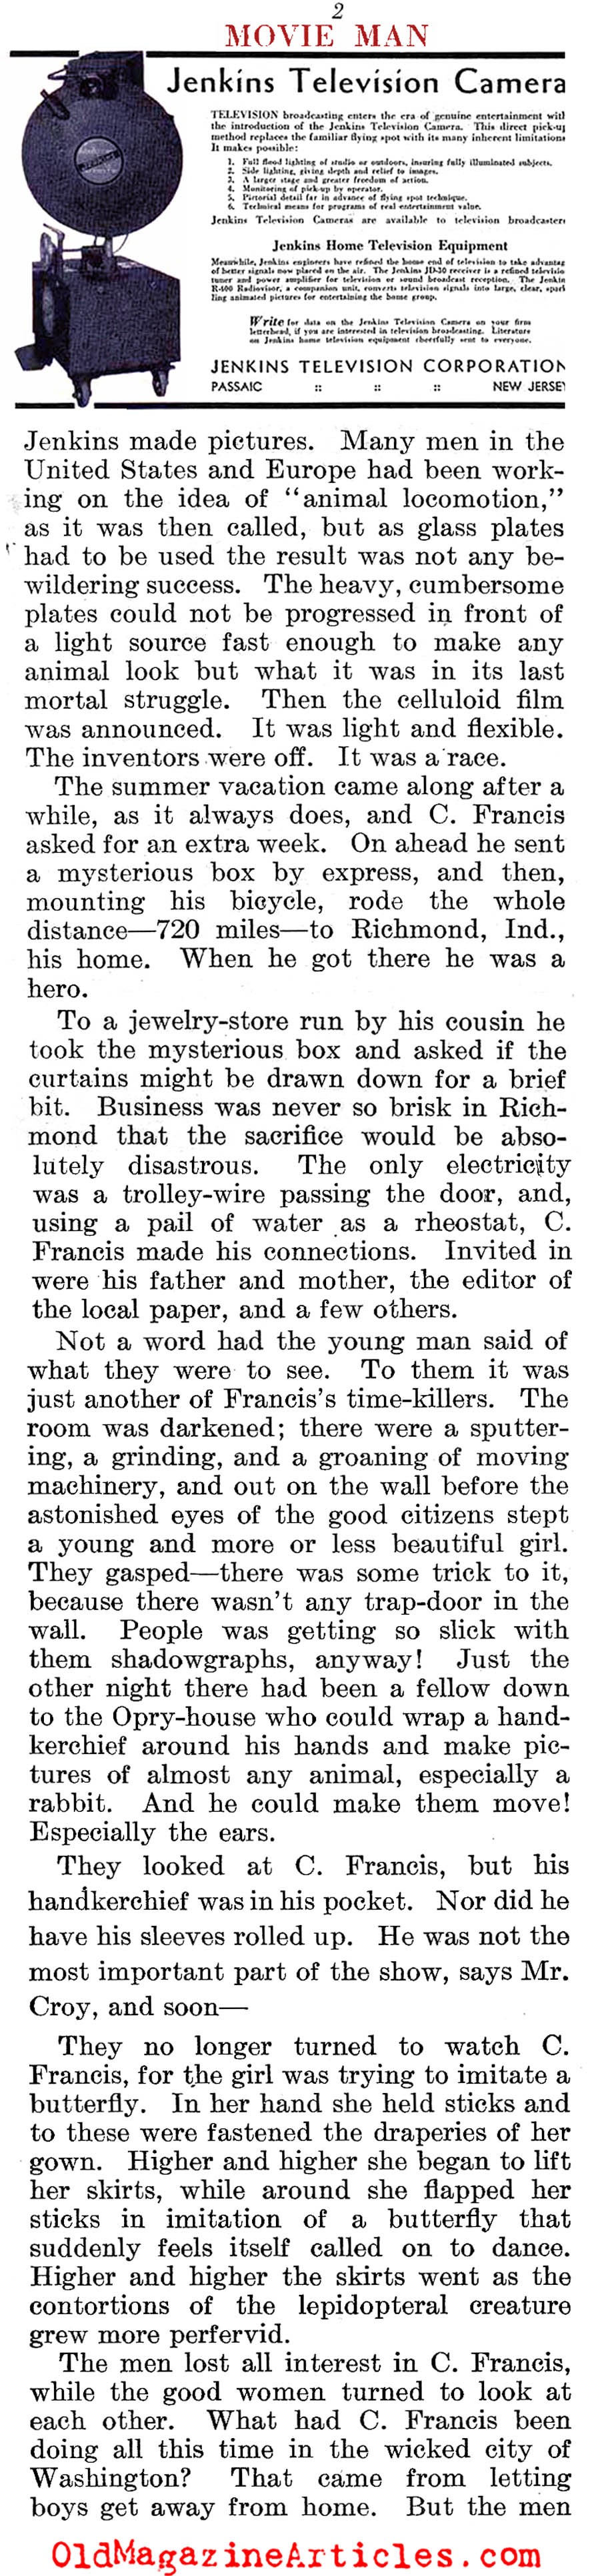 He Made the Pictures Move (The Literary Digest, 1921)